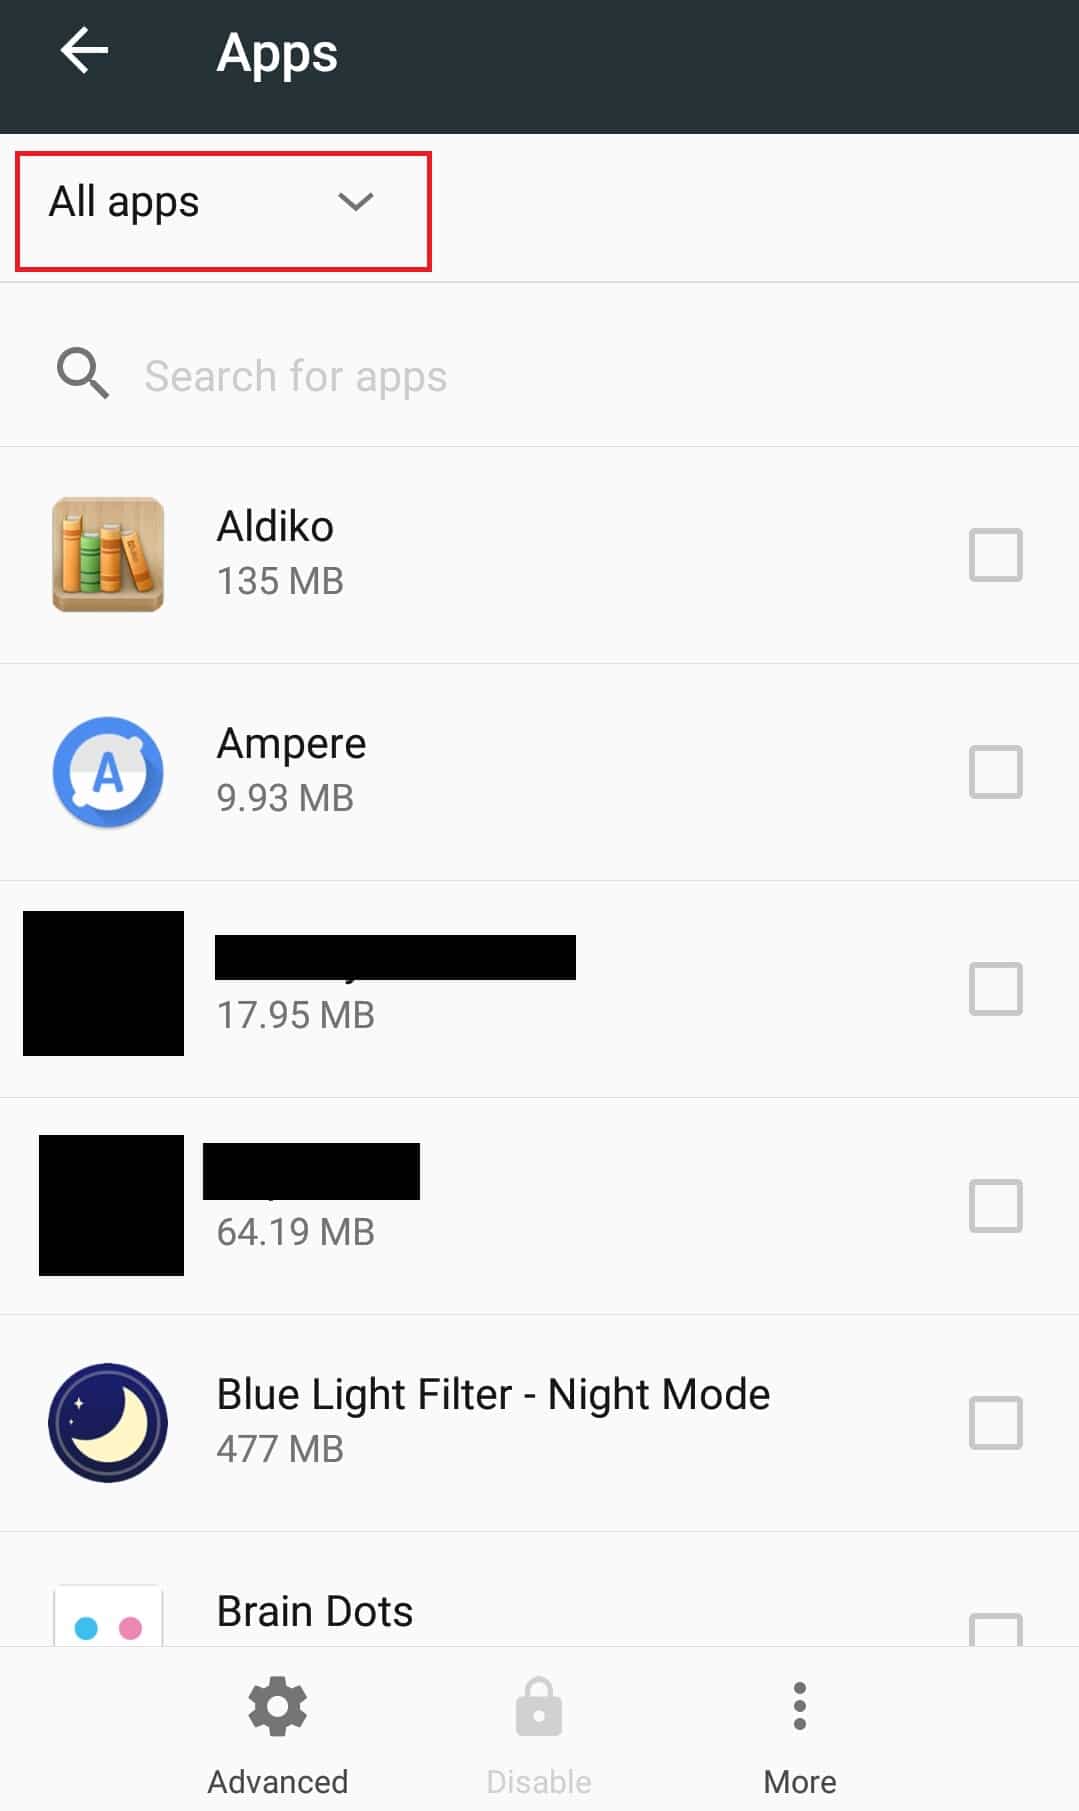 All apps option. How to Unhide Apps on Android